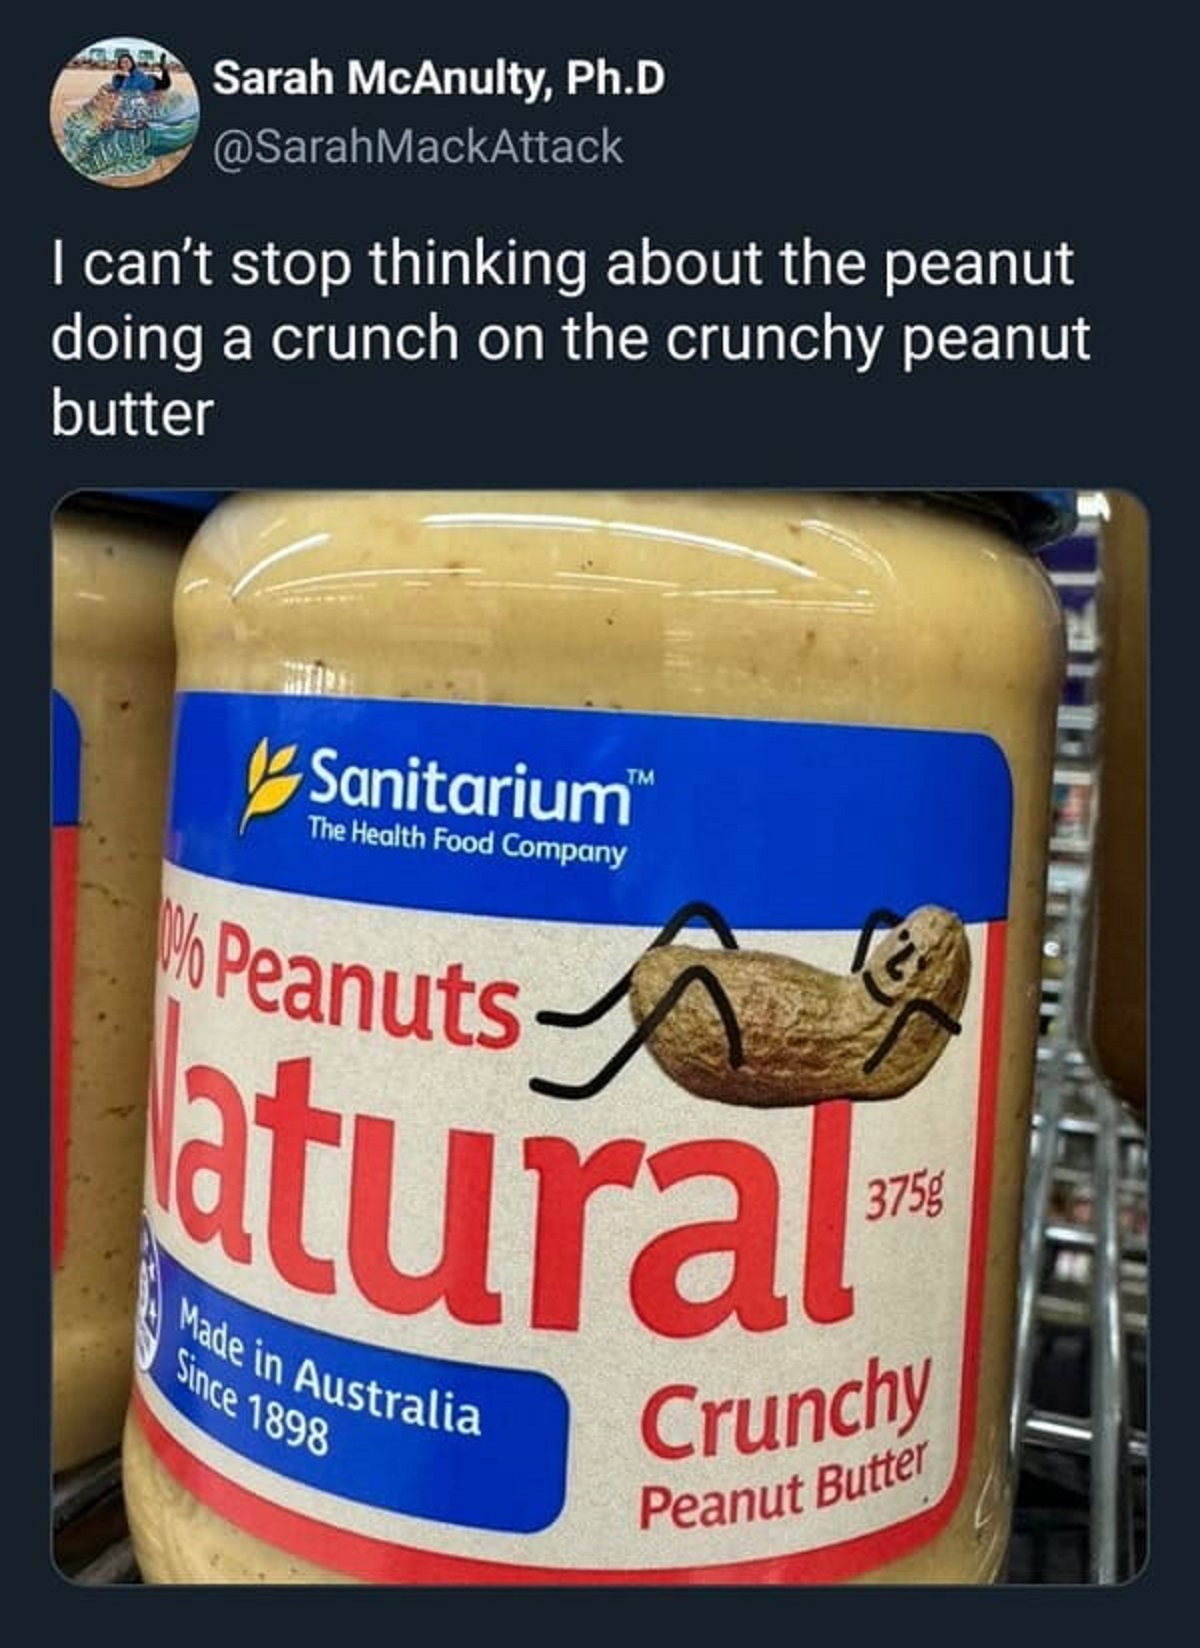 dulce de leche - Sarah McAnulty, Ph.D I can't stop thinking about the peanut doing a crunch on the crunchy peanut butter Sanitarium The Health Food Company Peanuts Tm atural Made in Australia Since 1898 Crunchy Peanut Butter